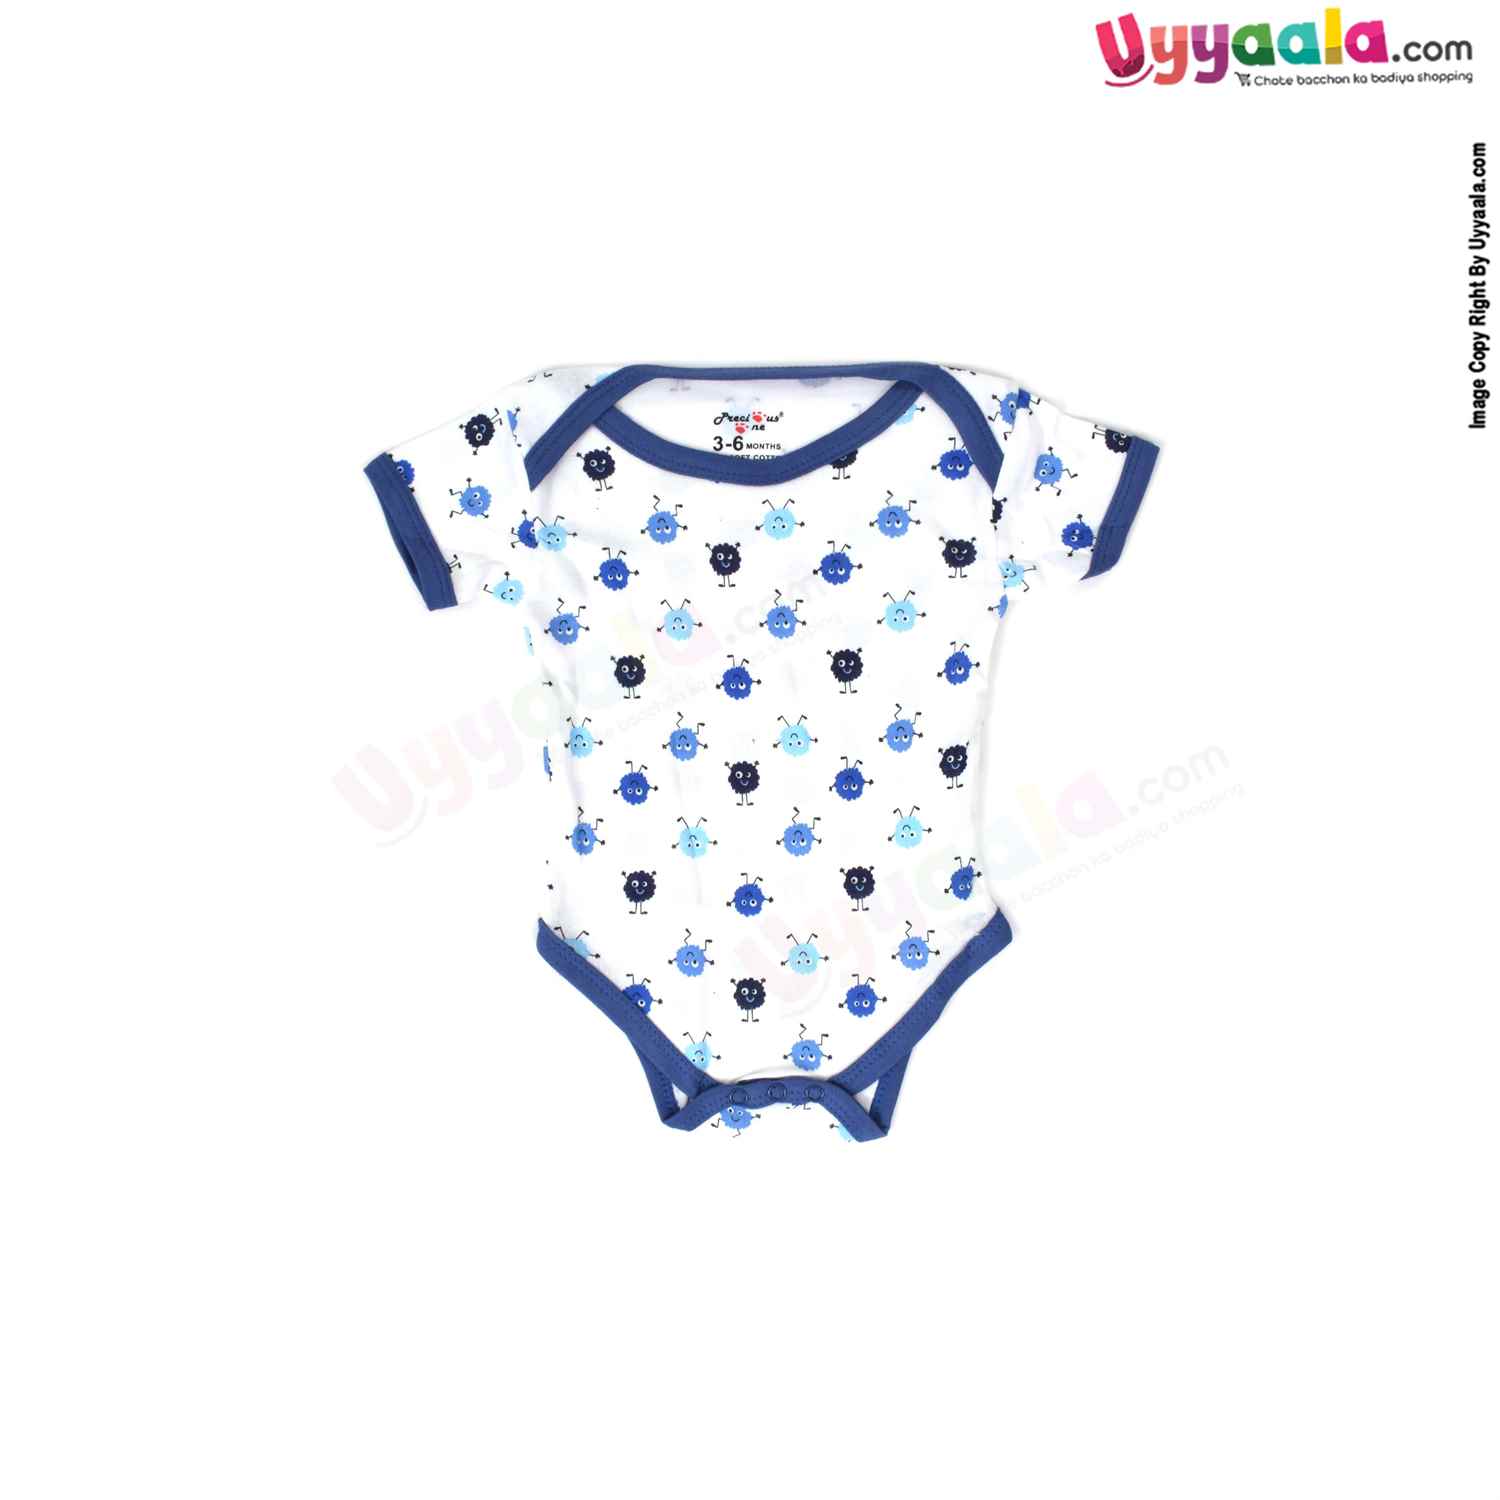 Precious One Short Sleeve Body Suit 100% Soft Hosiery Cotton - Navy Blue & White with assorted print (3-6M)